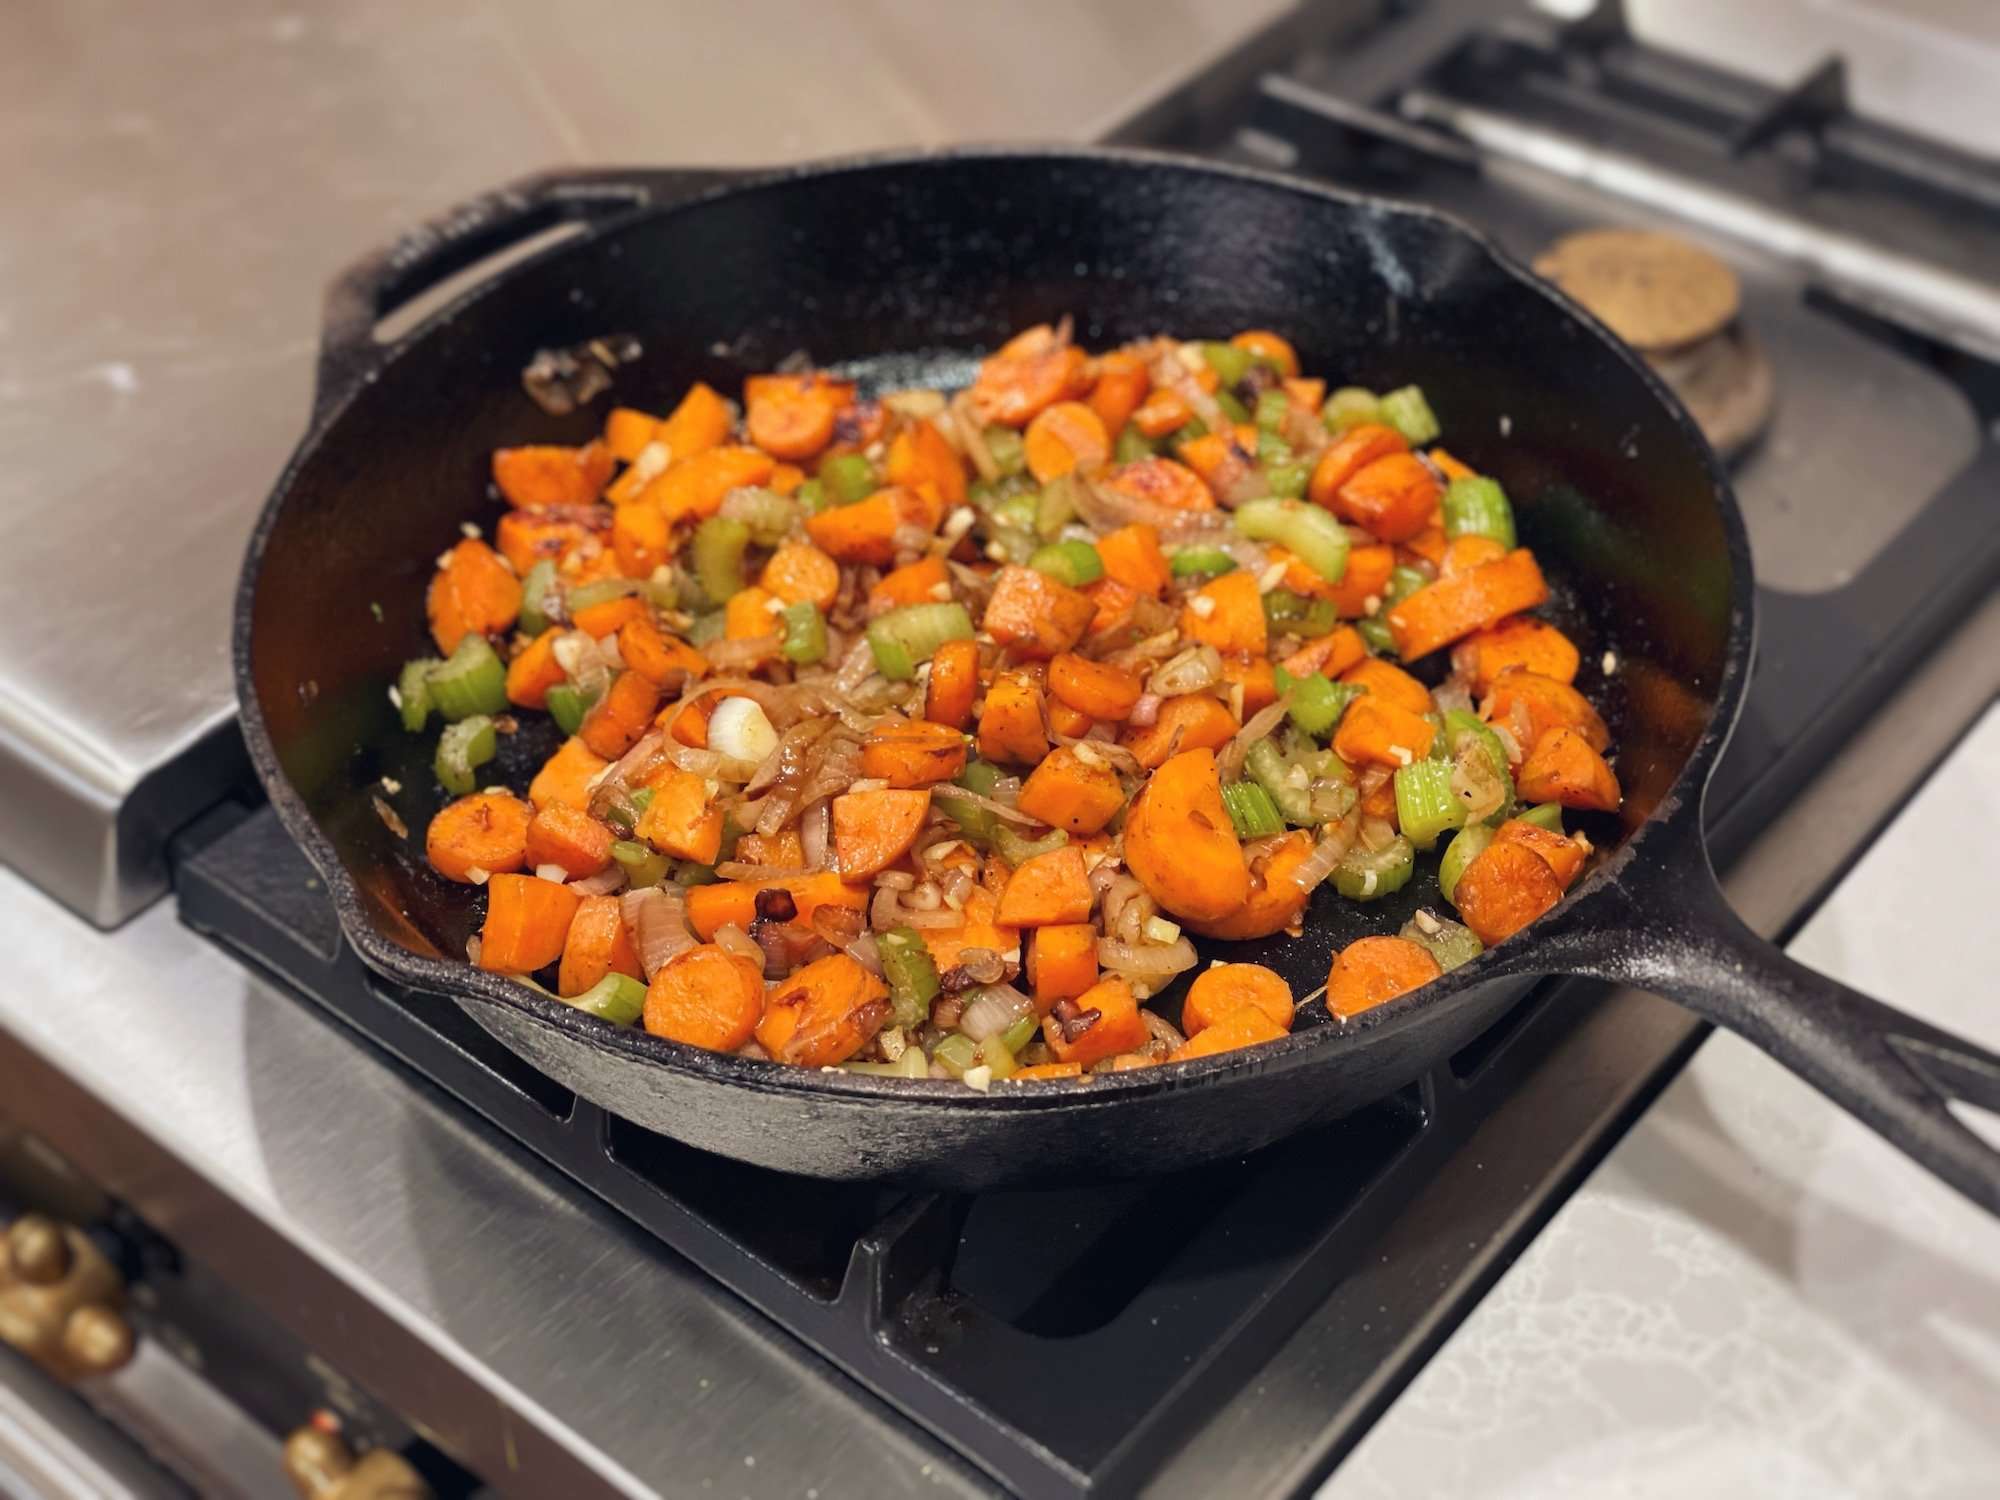 Sautéing carrots, onion and celery in a cast iron skillet on a gas range